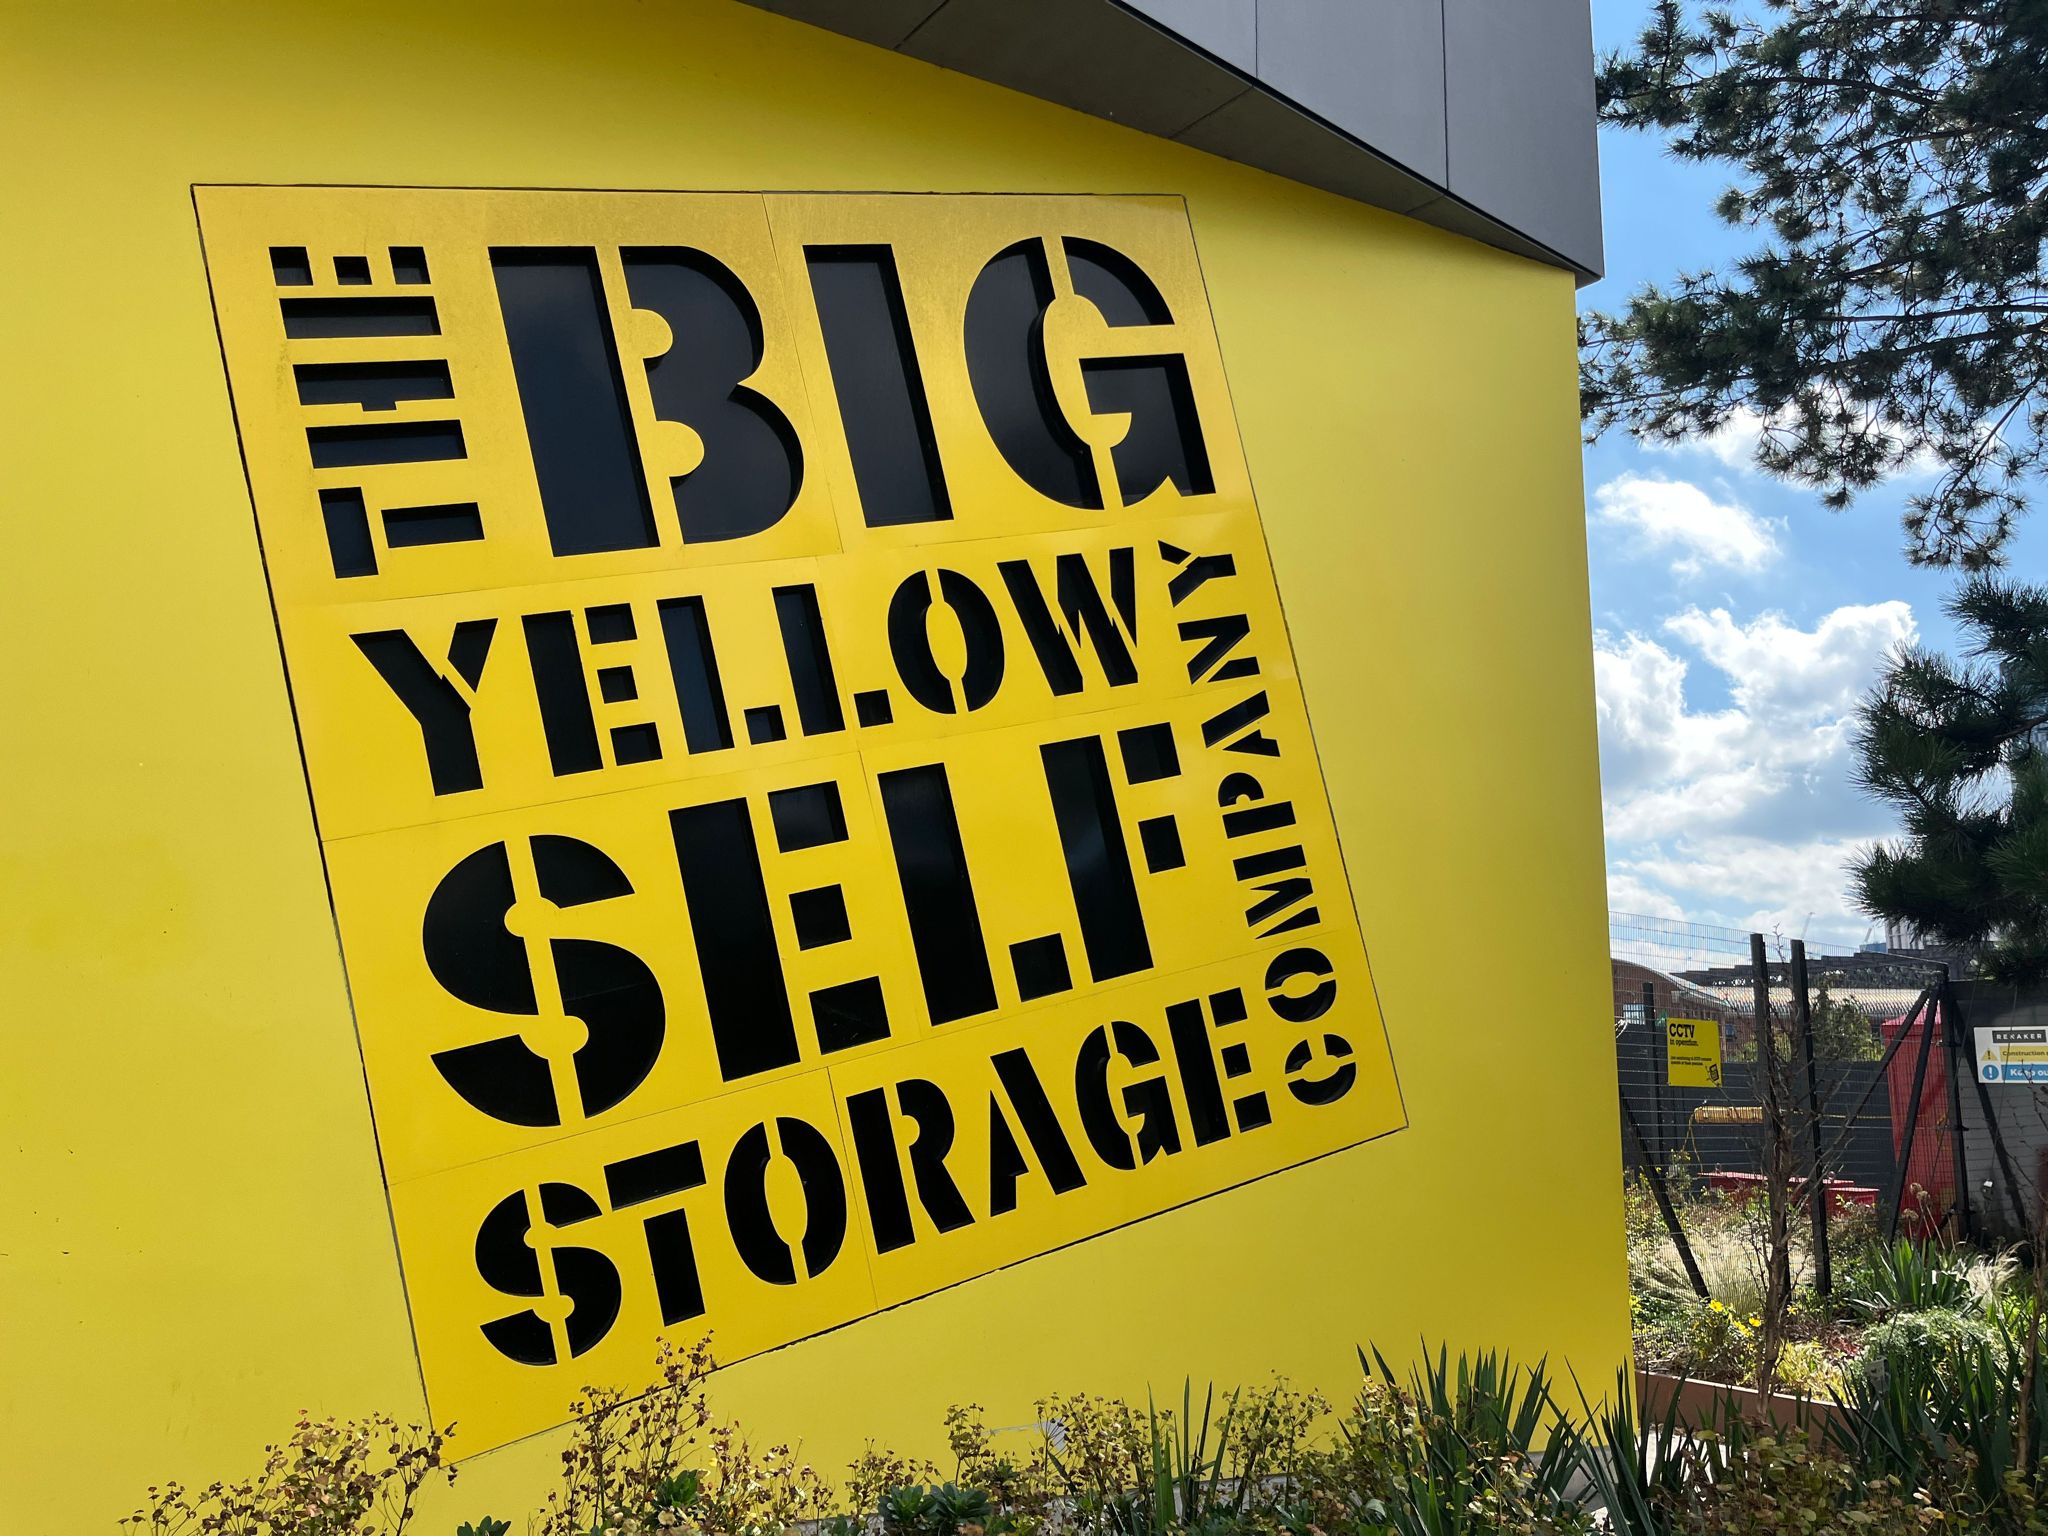 big yellow storage exterior sign with company name